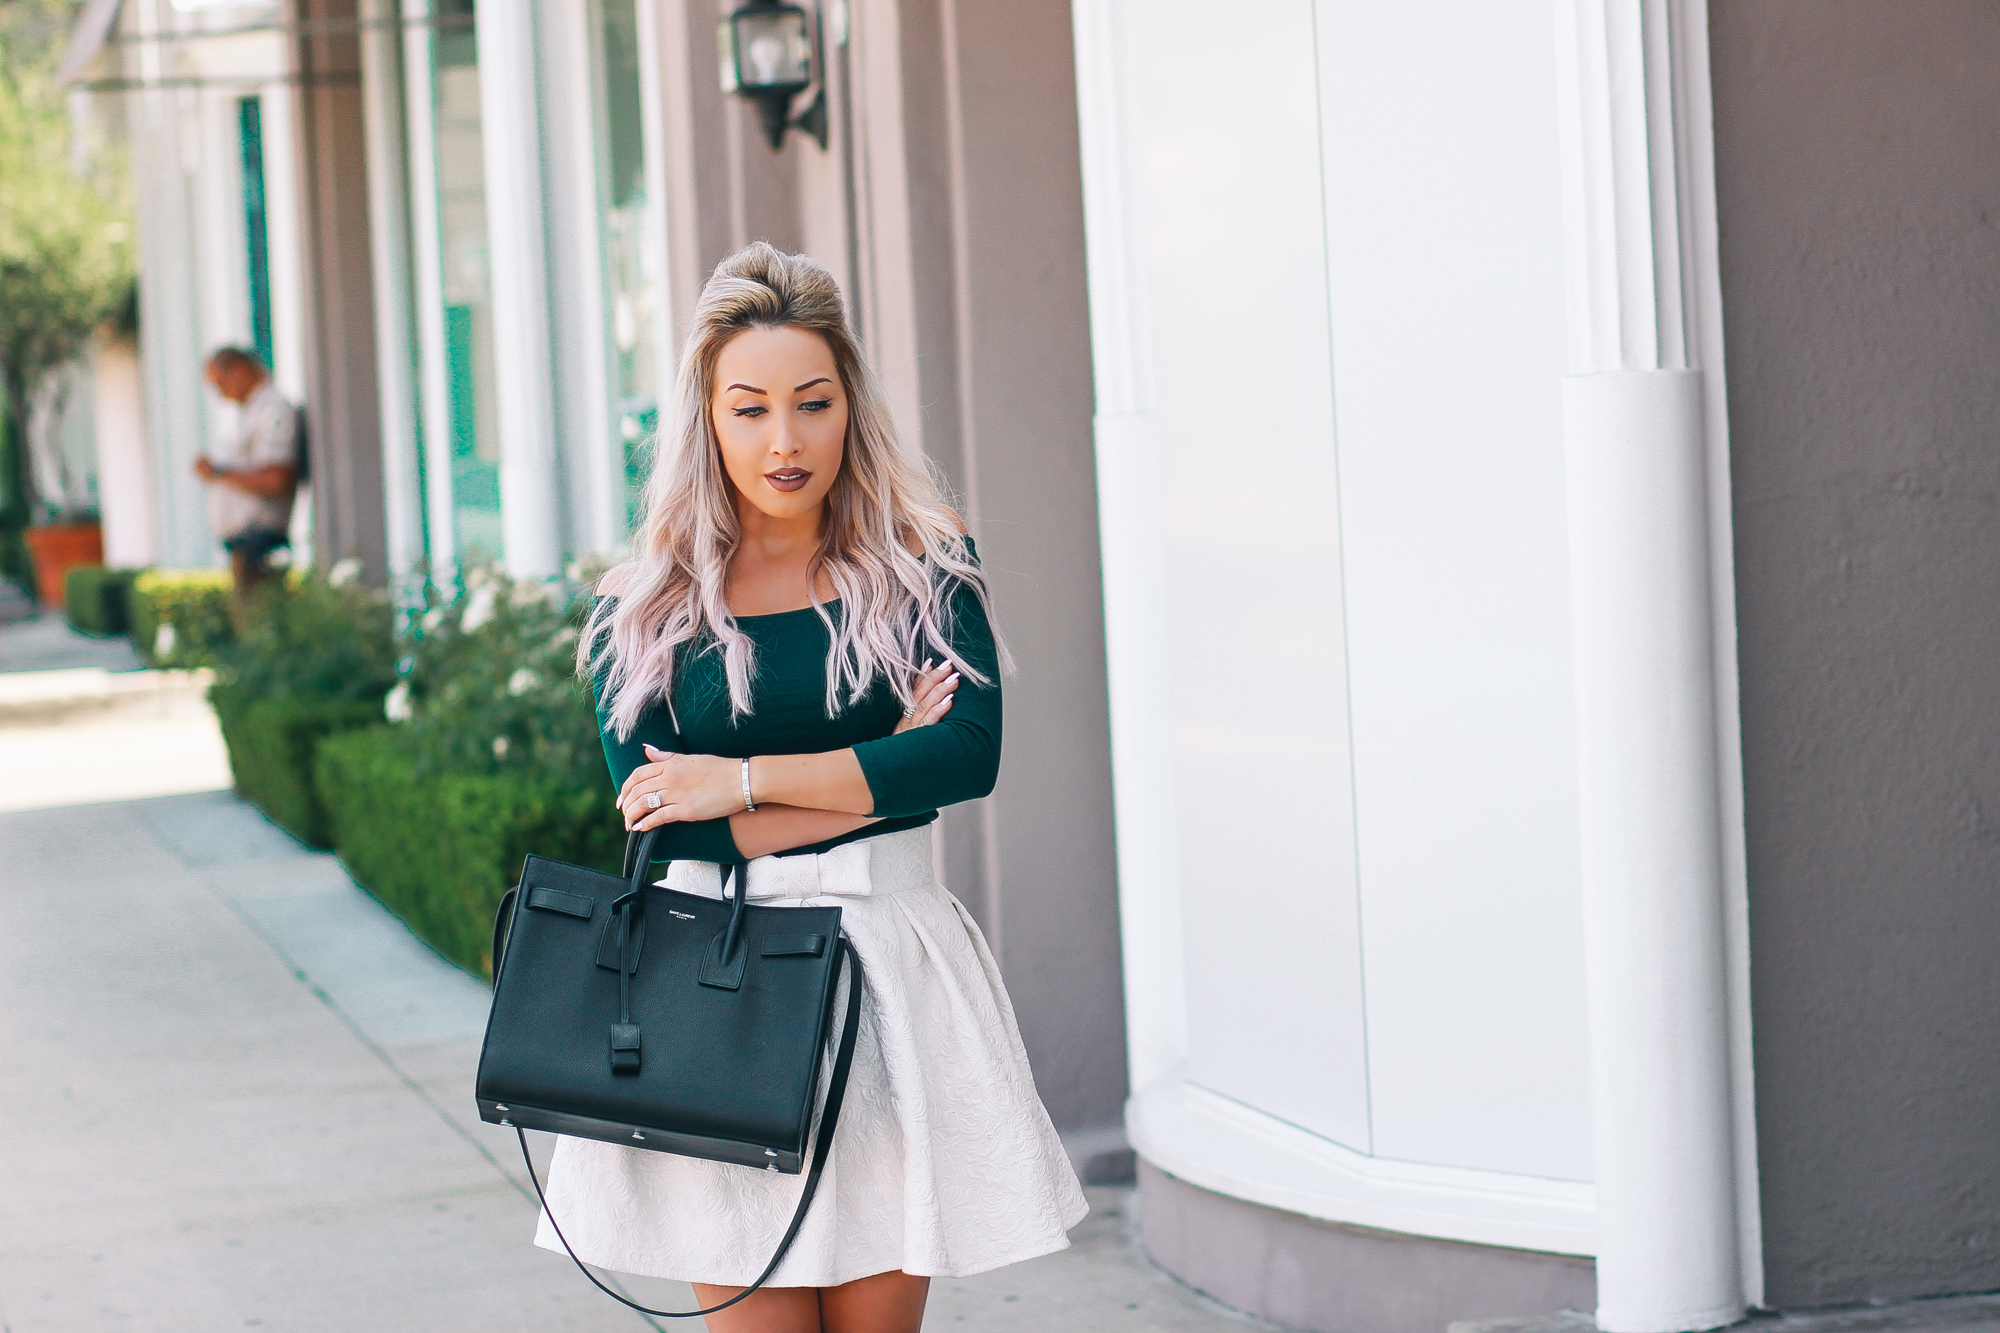 Blondie in the City | Forest Green & Ivory Lace | Chic Street Style Fashion